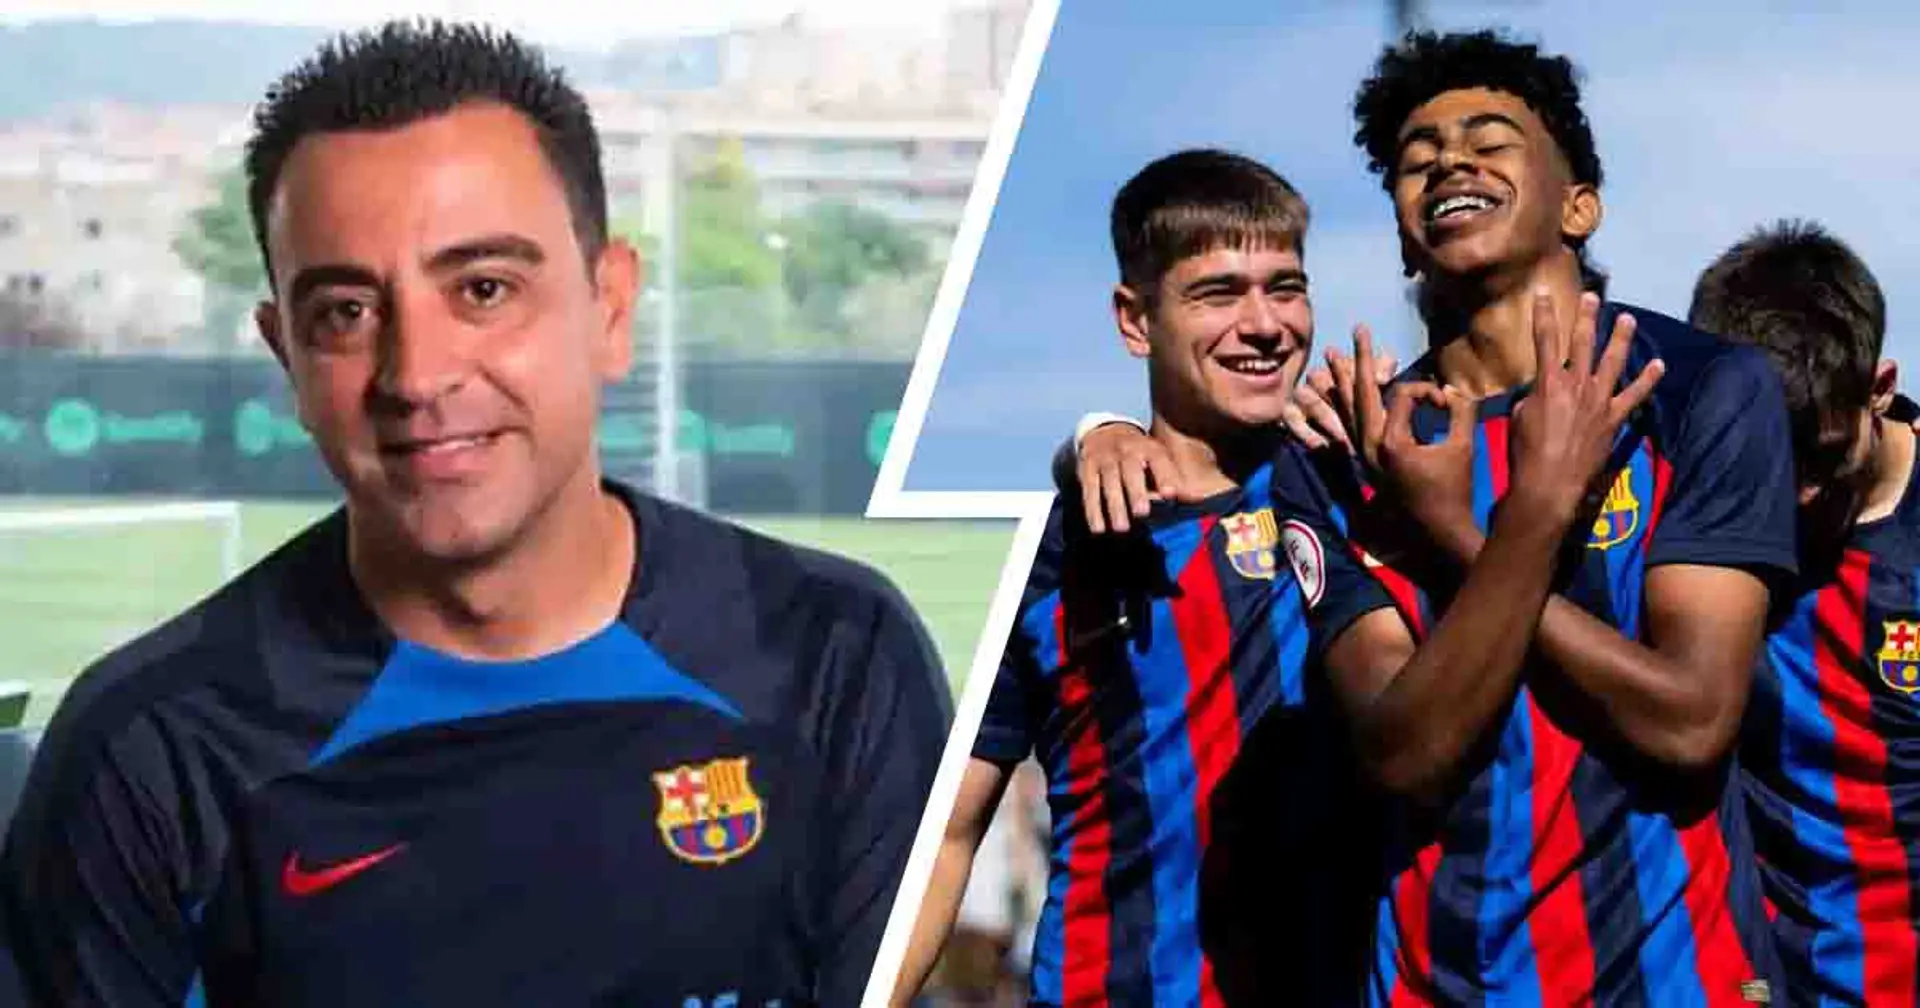 Barcelona set to include five exciting youth team stars in preseason squad; one is Yamal